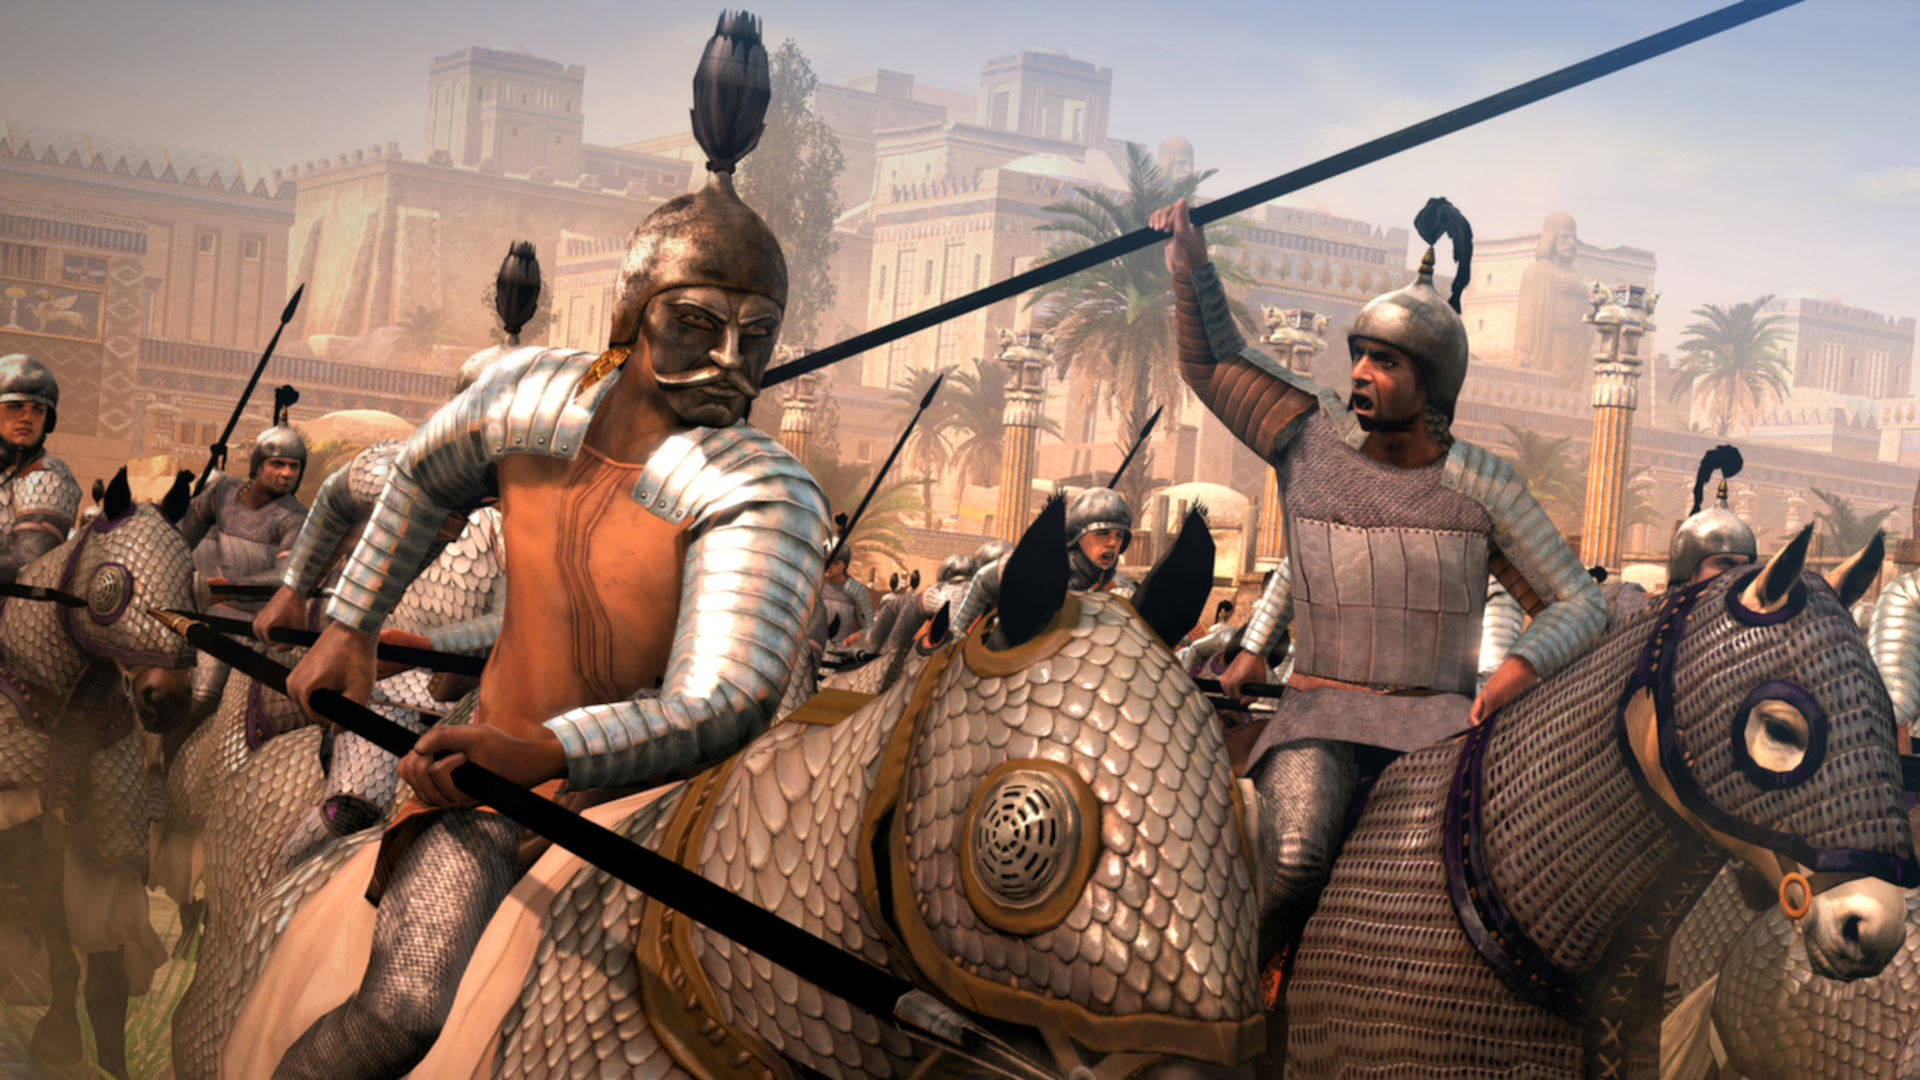 Experience the epic period battles of Rome with Rome Total War Wallpaper